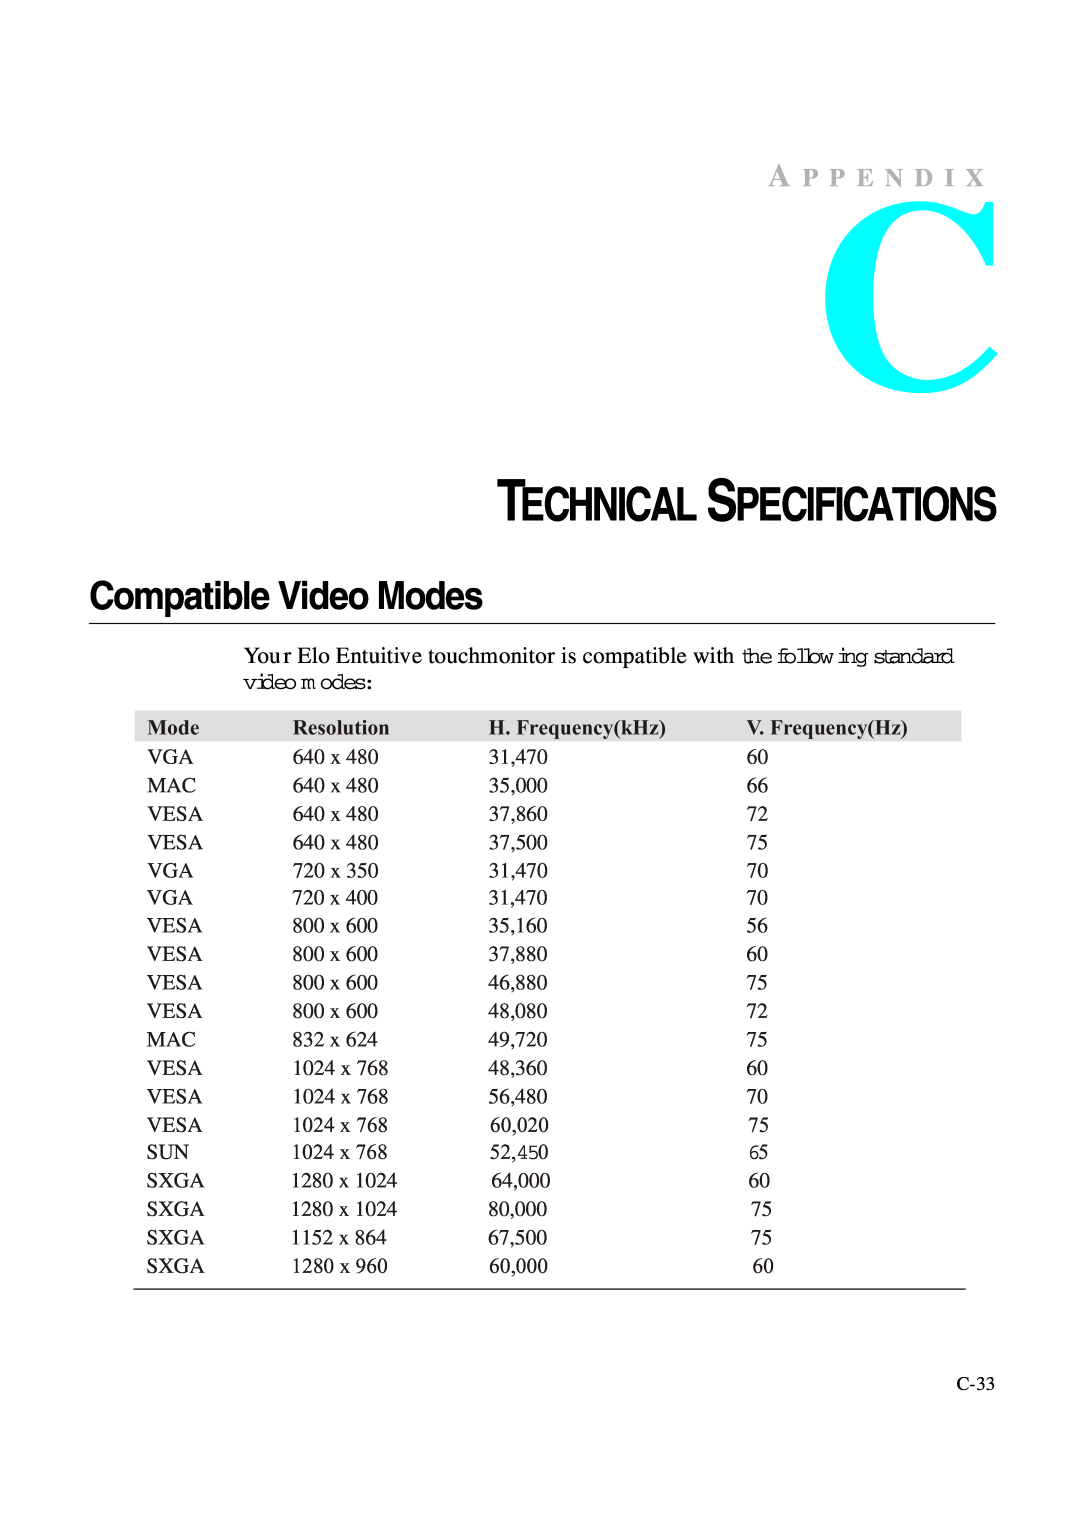 Tyco 1847L Series manual Technical Specifications, Compatible Video Modes, A P P E N D I, video m odes, Resolution, 1024 x 